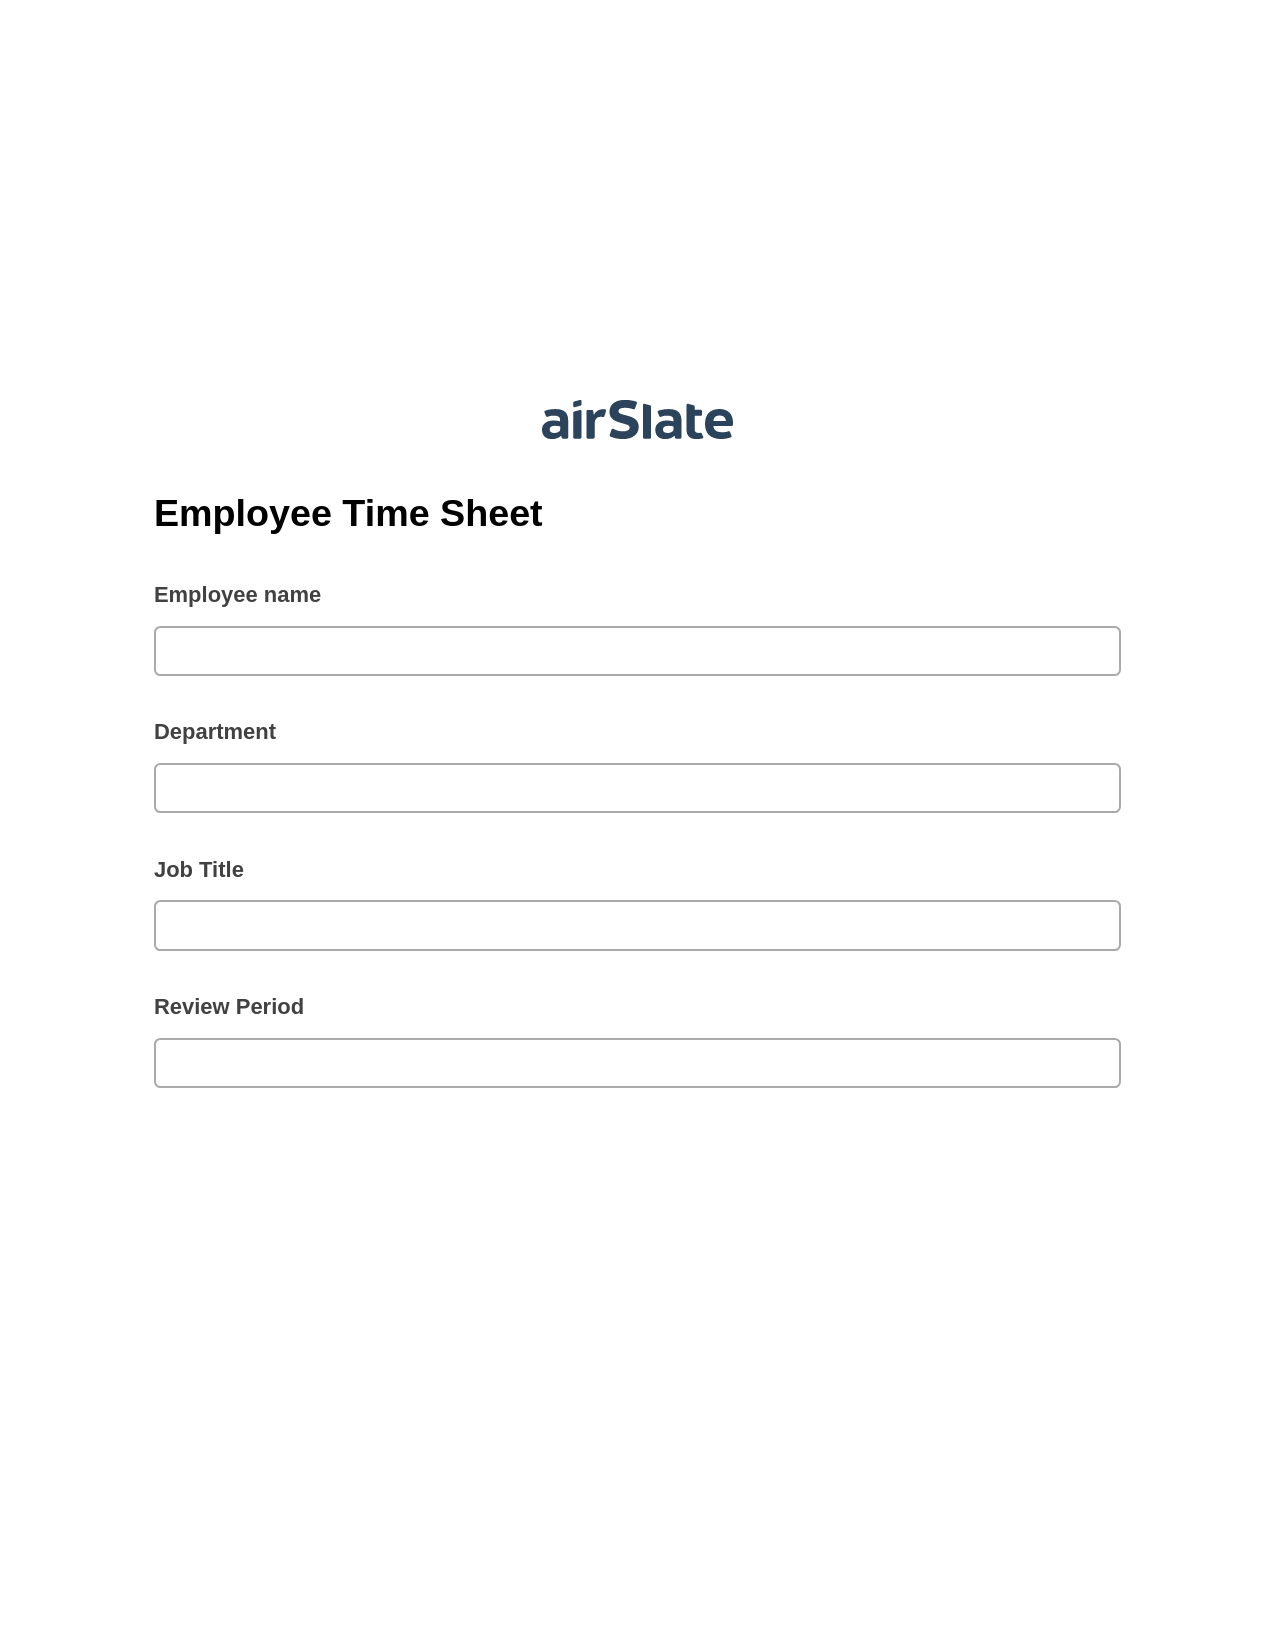 Employee Time Sheet Pre-fill from Smartsheet Bot, Update MS Dynamics 365 Record Bot, Export to NetSuite Bot